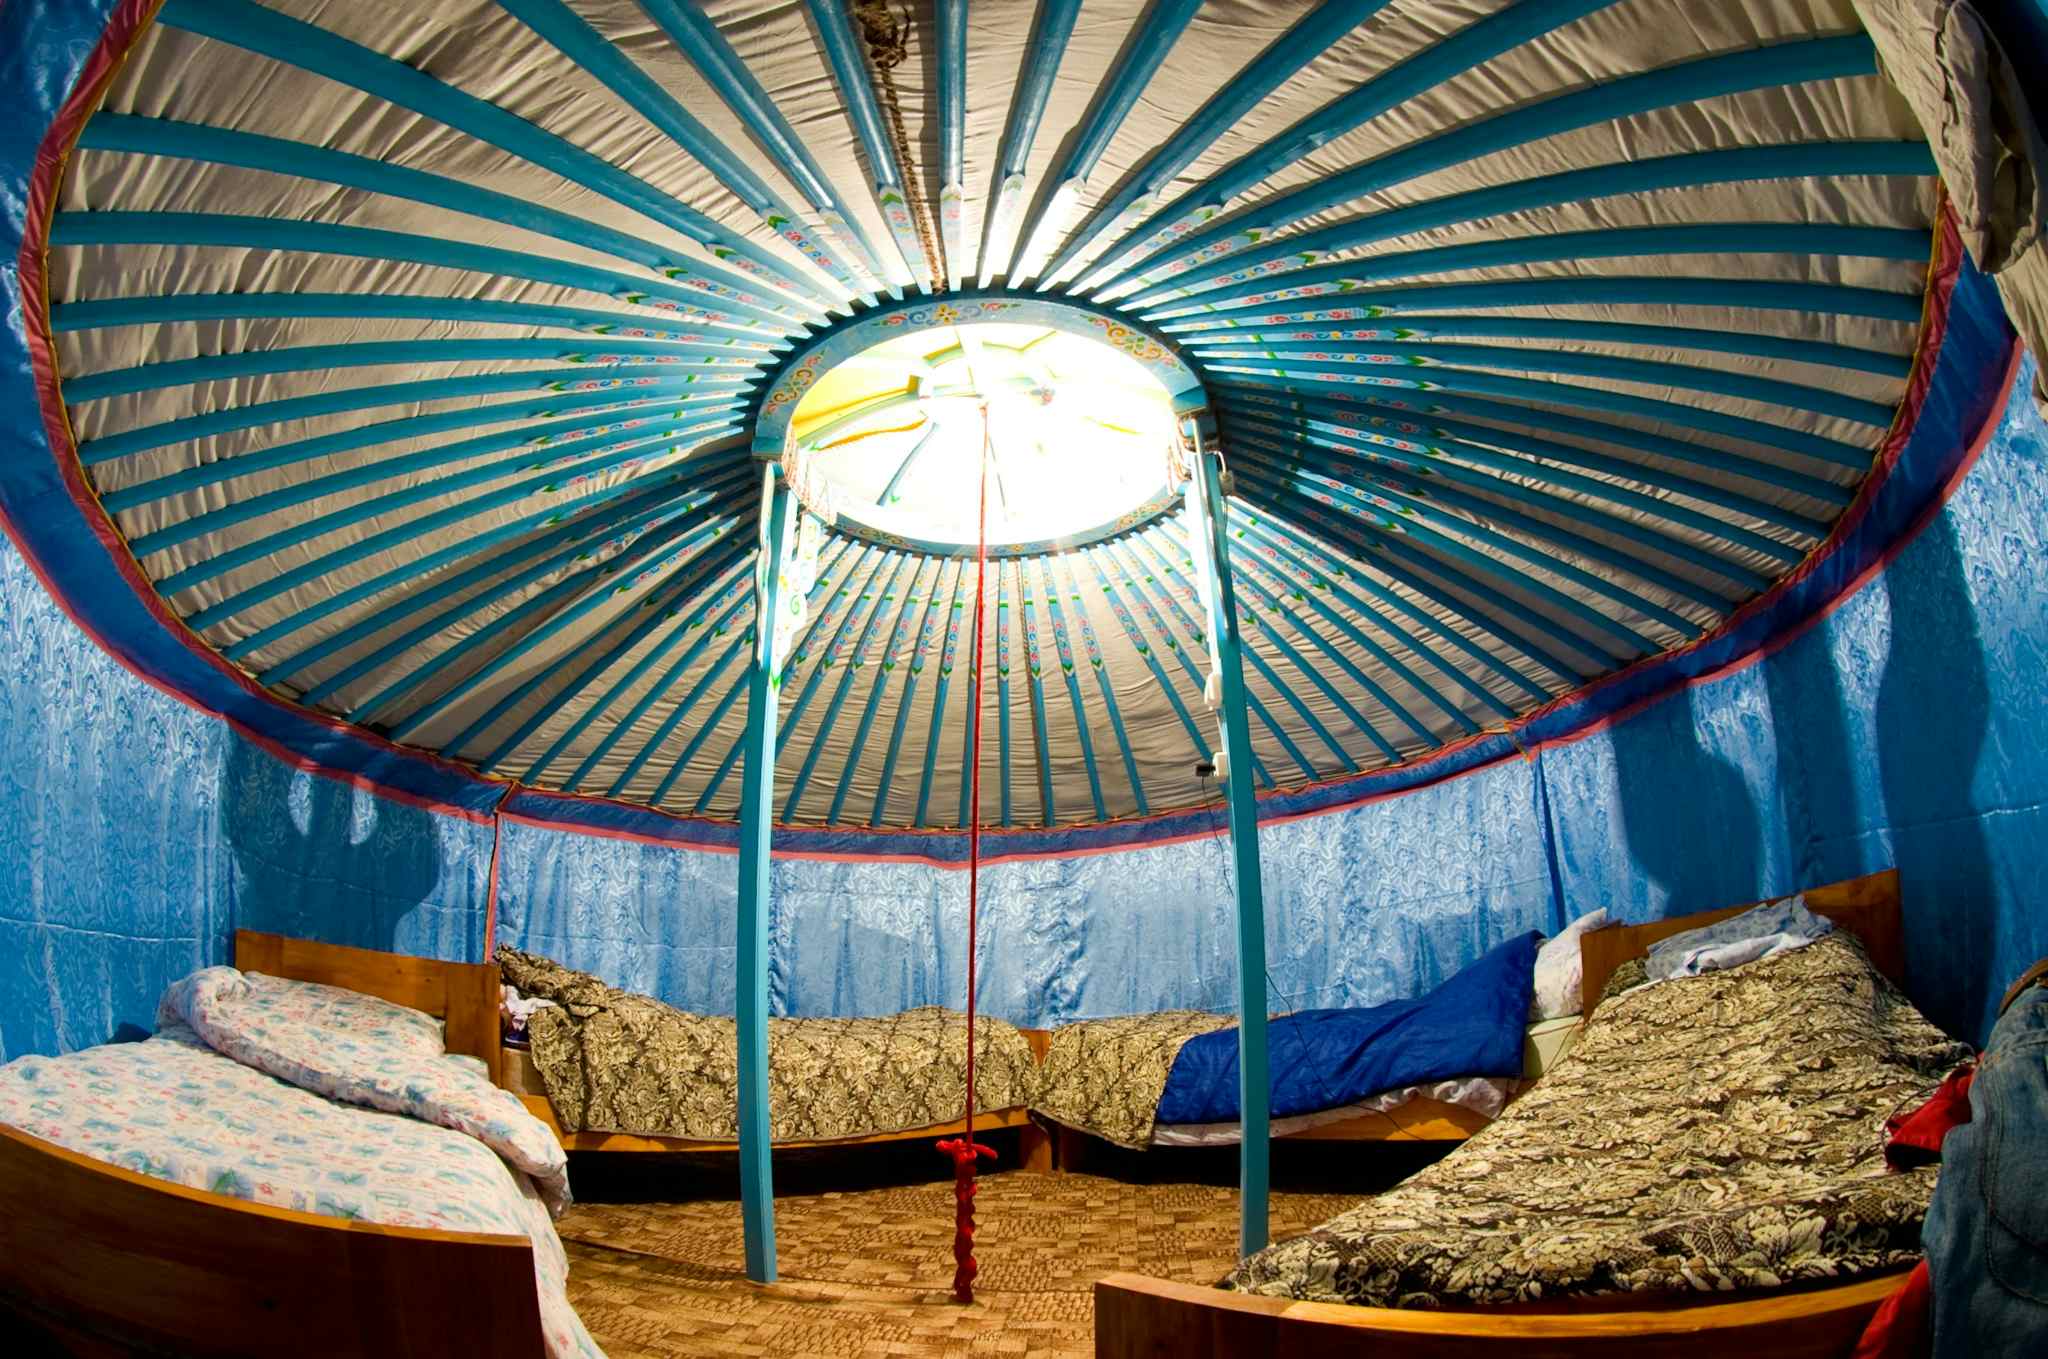 Yurt interior with four beds in a circle